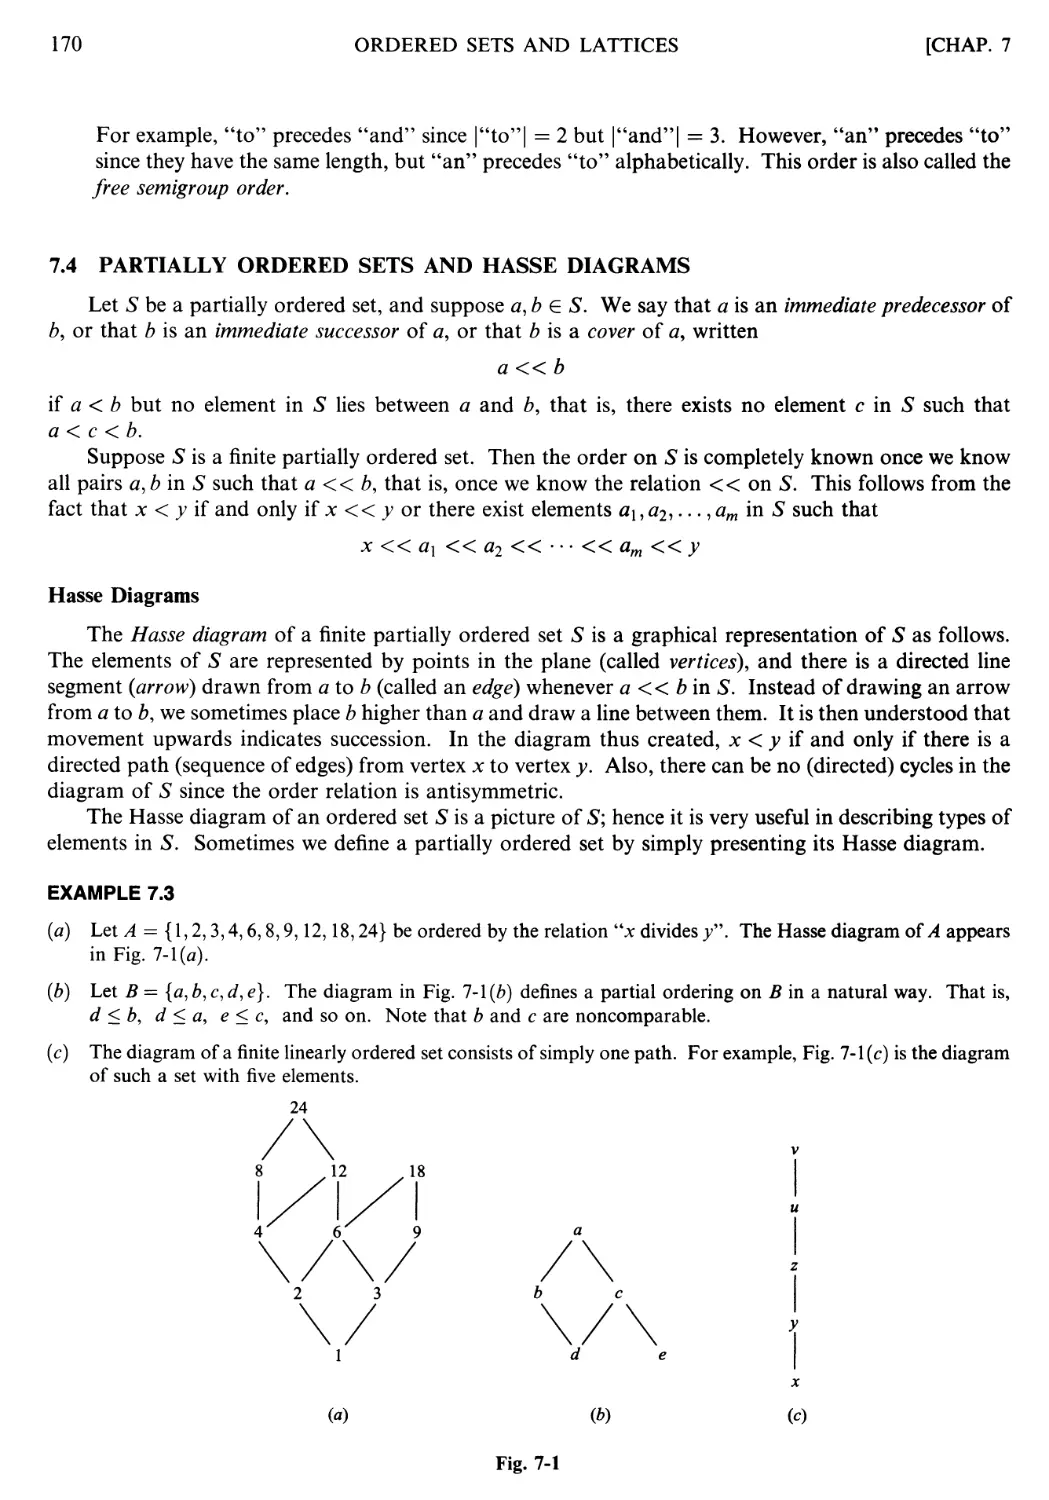 7.4 Partially ordered sets and Hasse diagrams